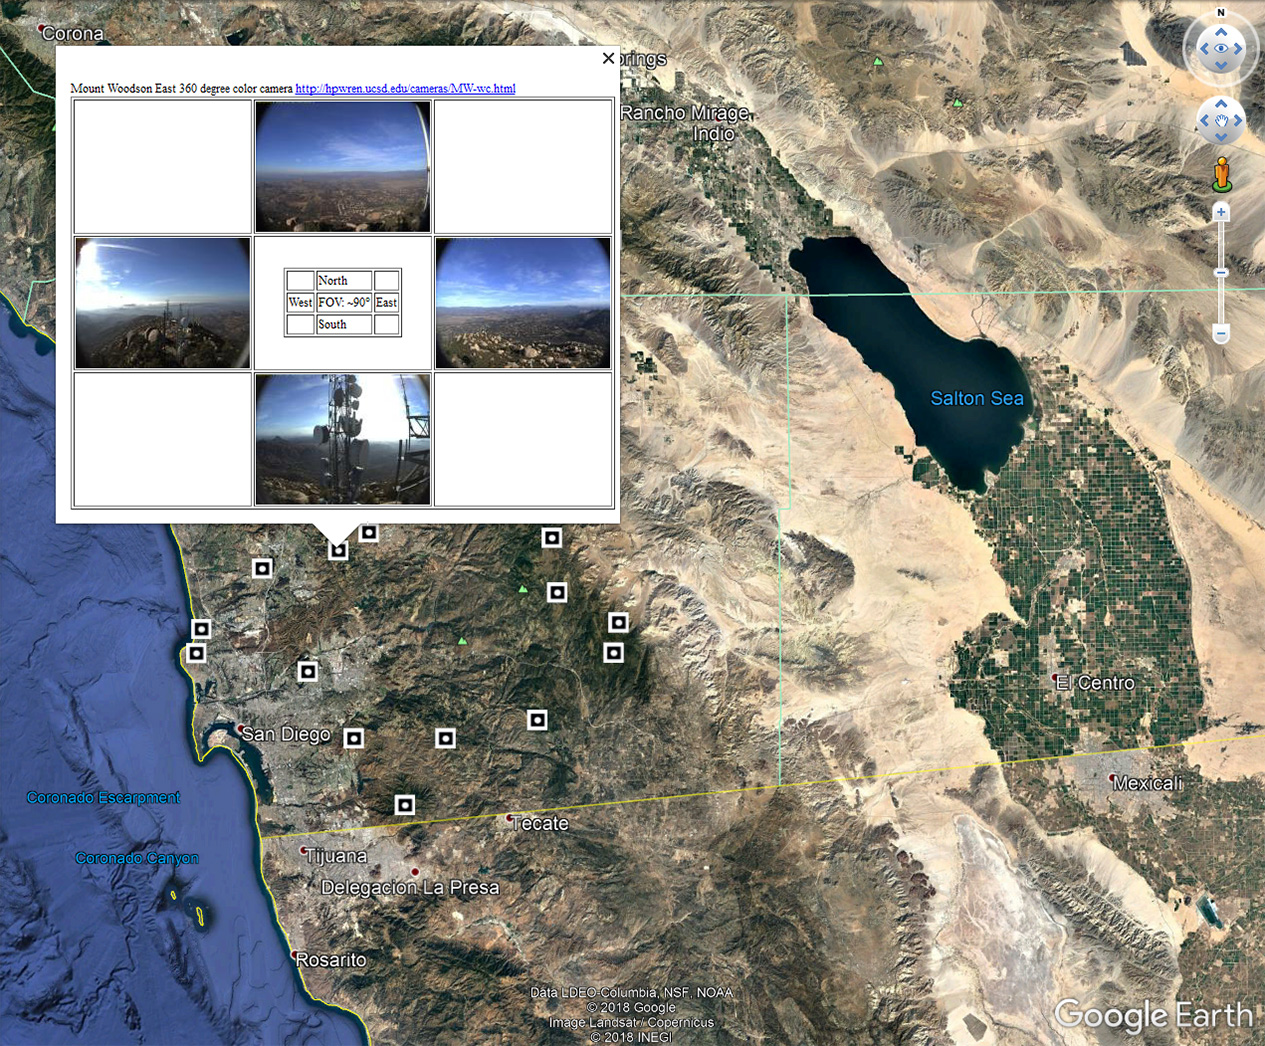 how to view live cameras on google earth